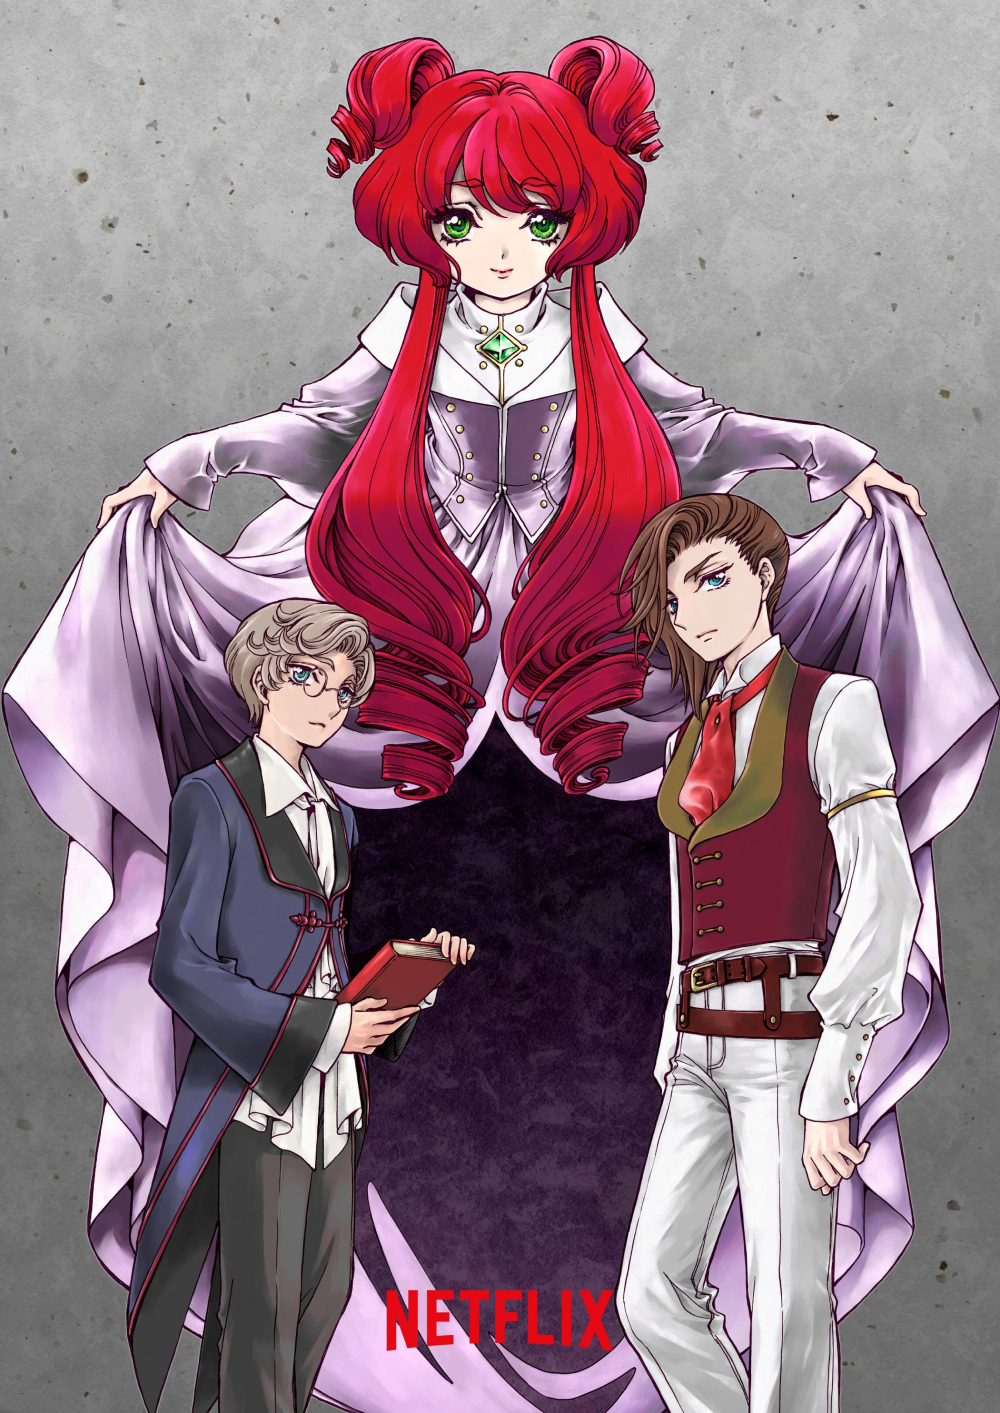 The Grimm Variations Anime